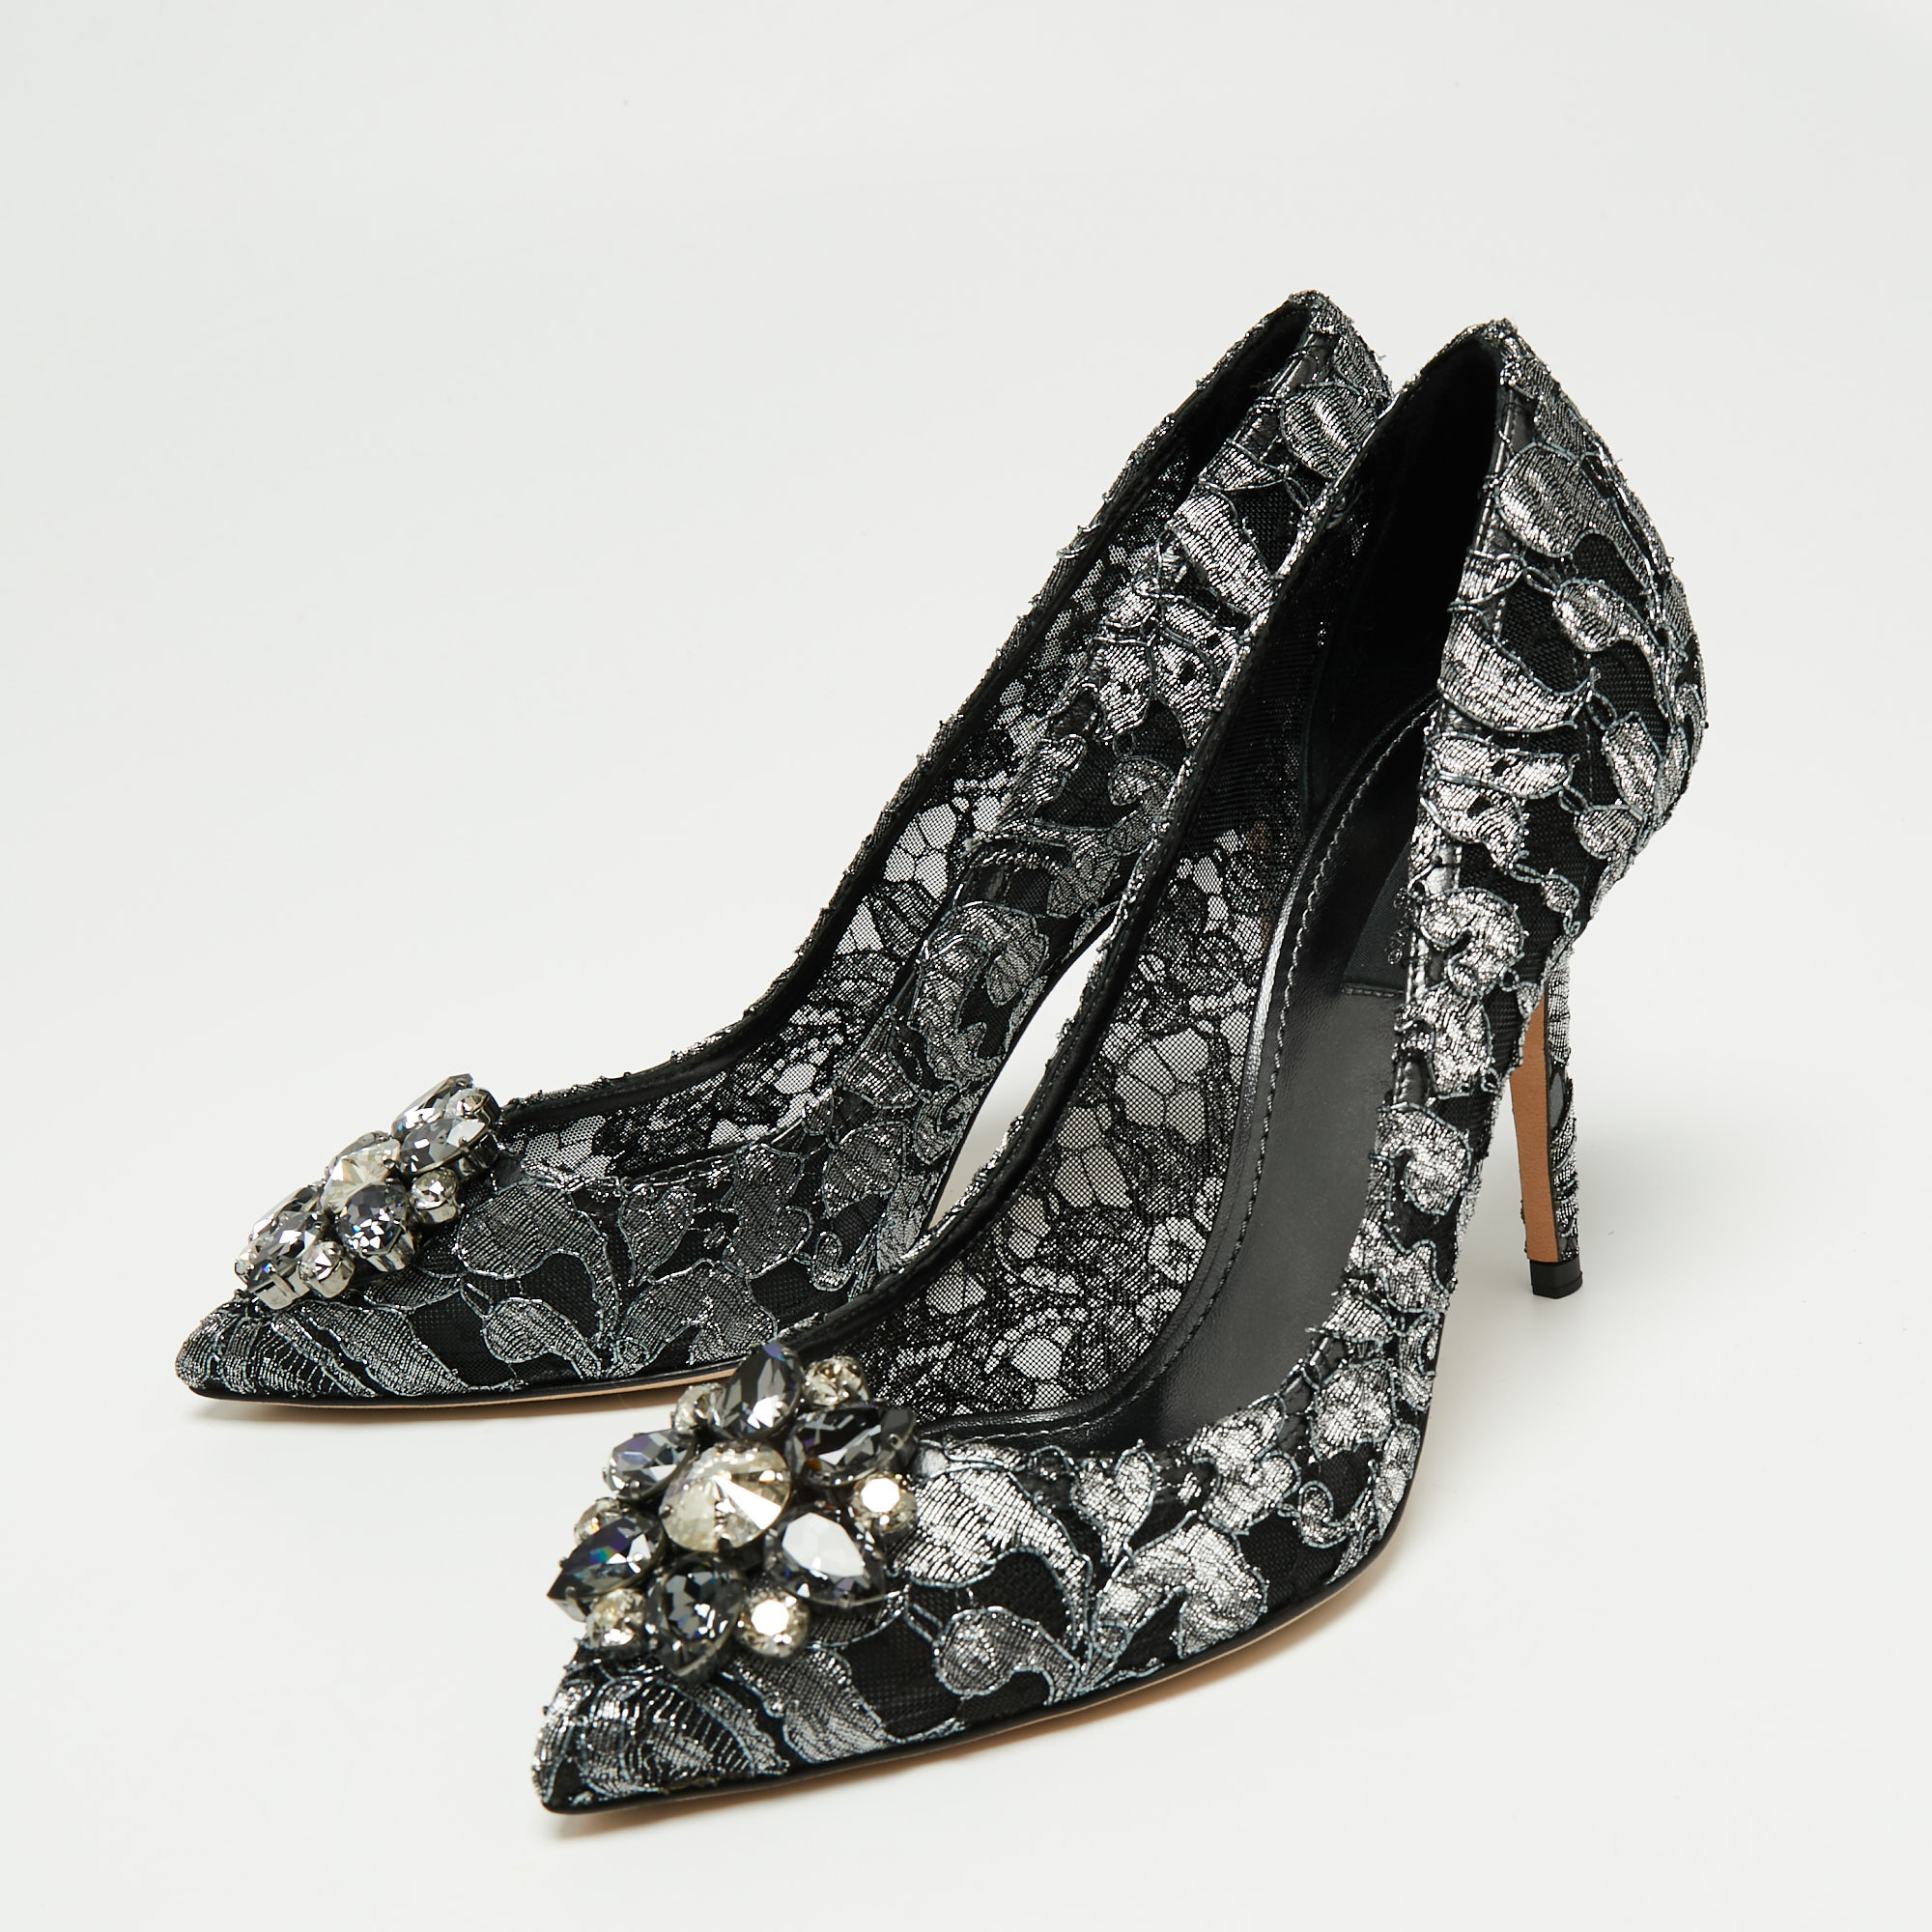 

Dolce & Gabbana Metallic Grey/Black Floral Lace And Mesh Bellucci Pointed Toe Pumps Size